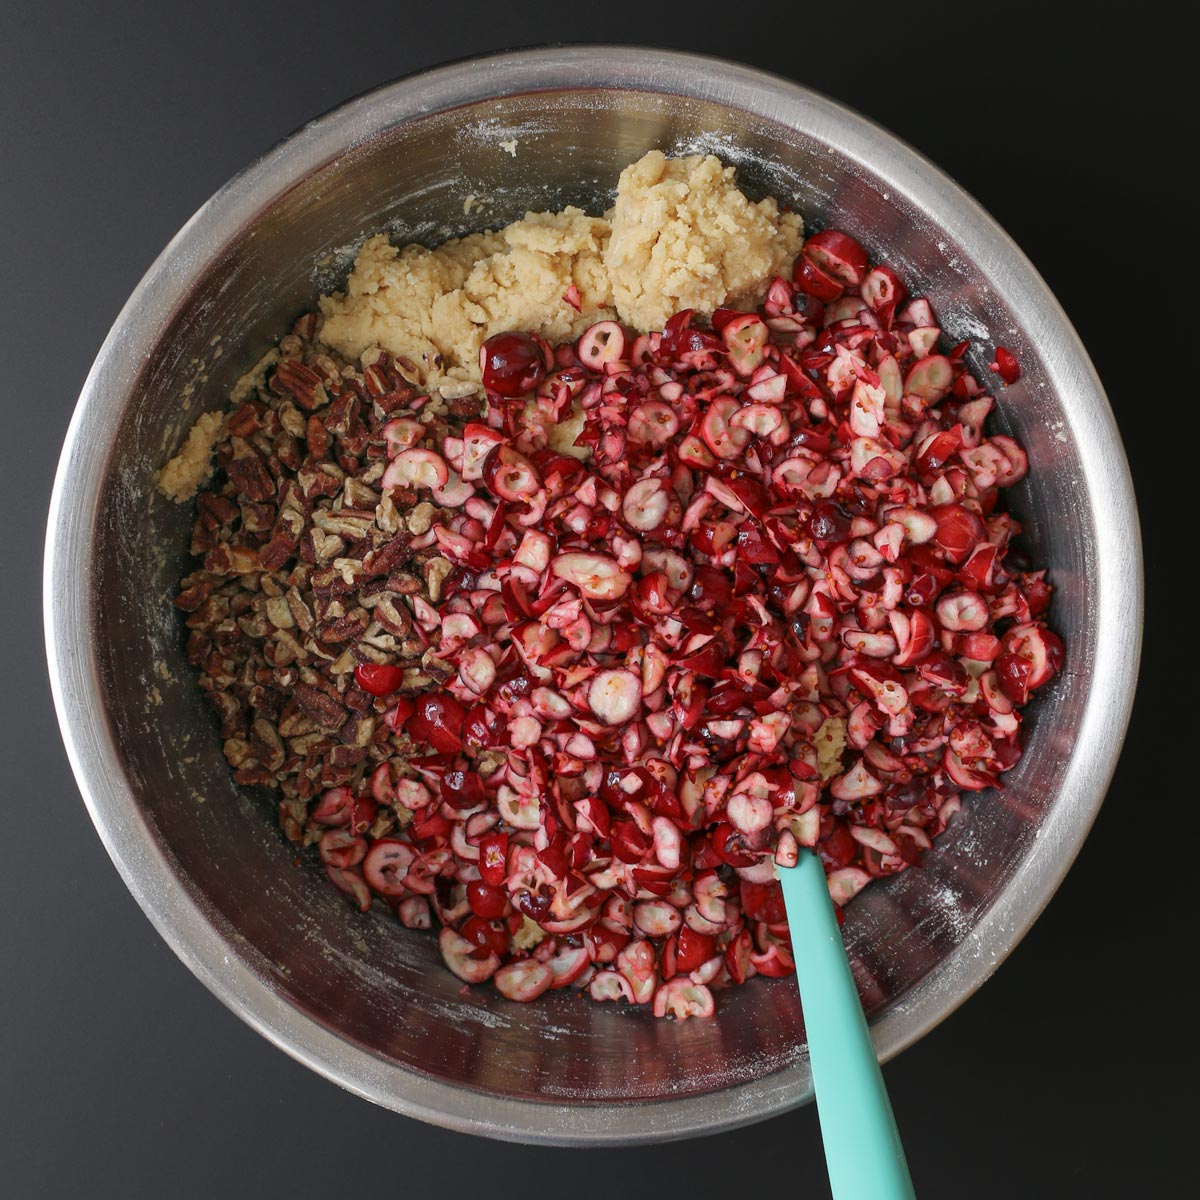 adding cranberries and nuts to the bowl.